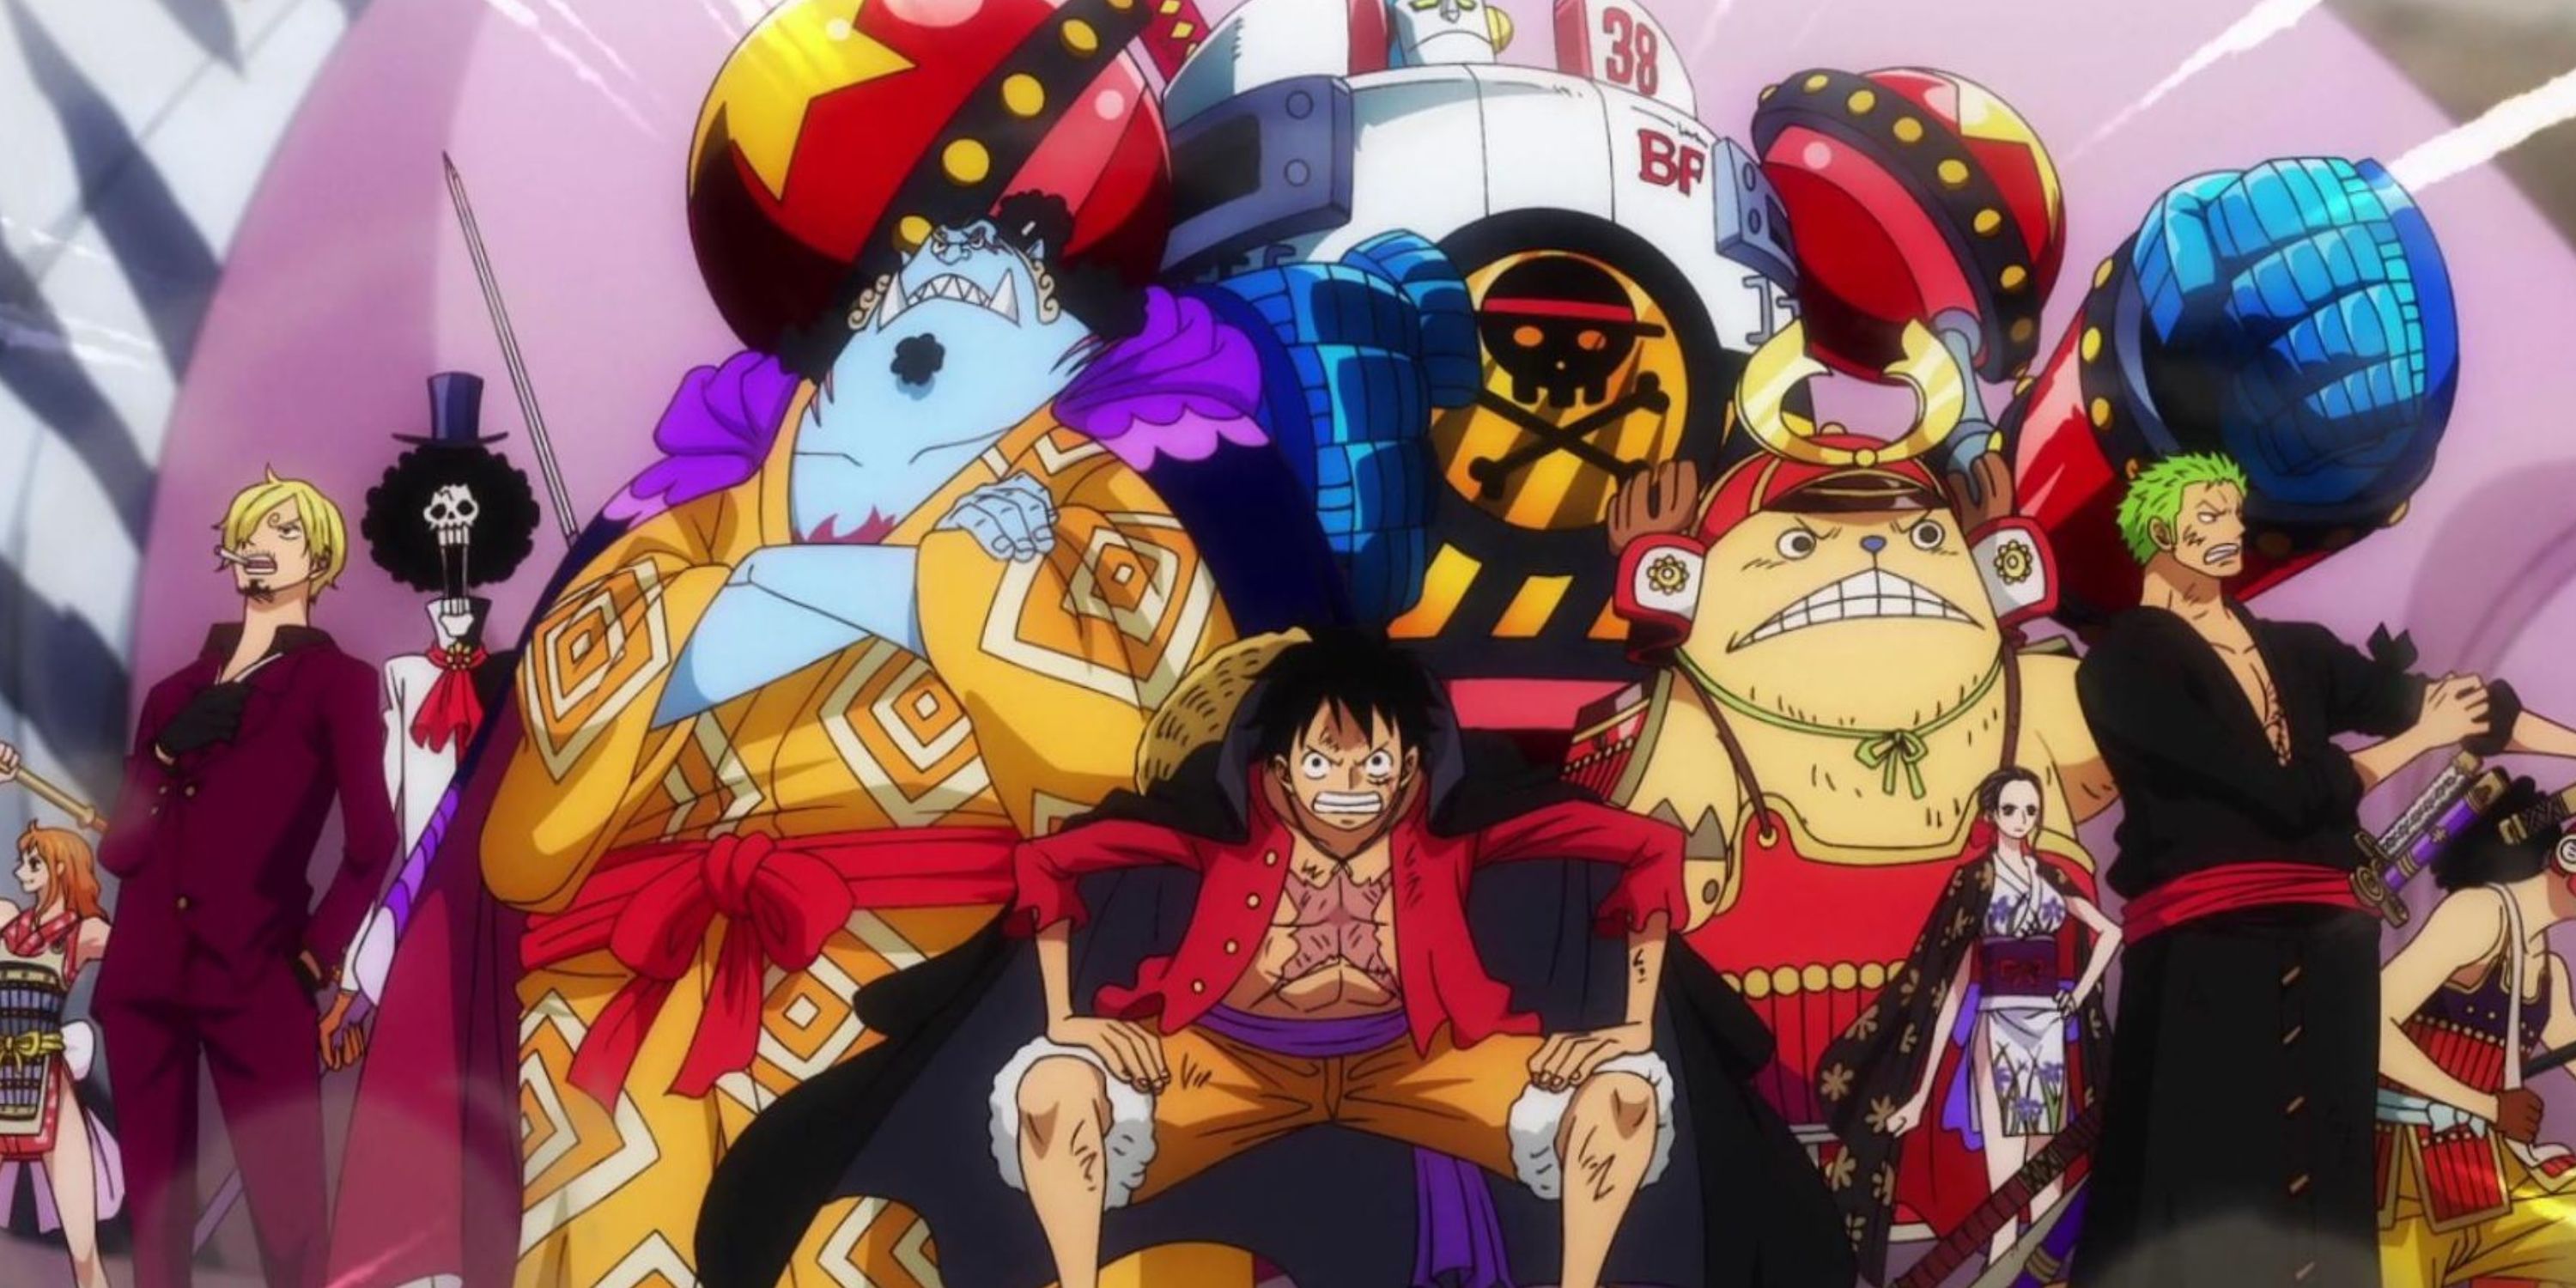 The Straw Hats assemble in One Piece episode 1000